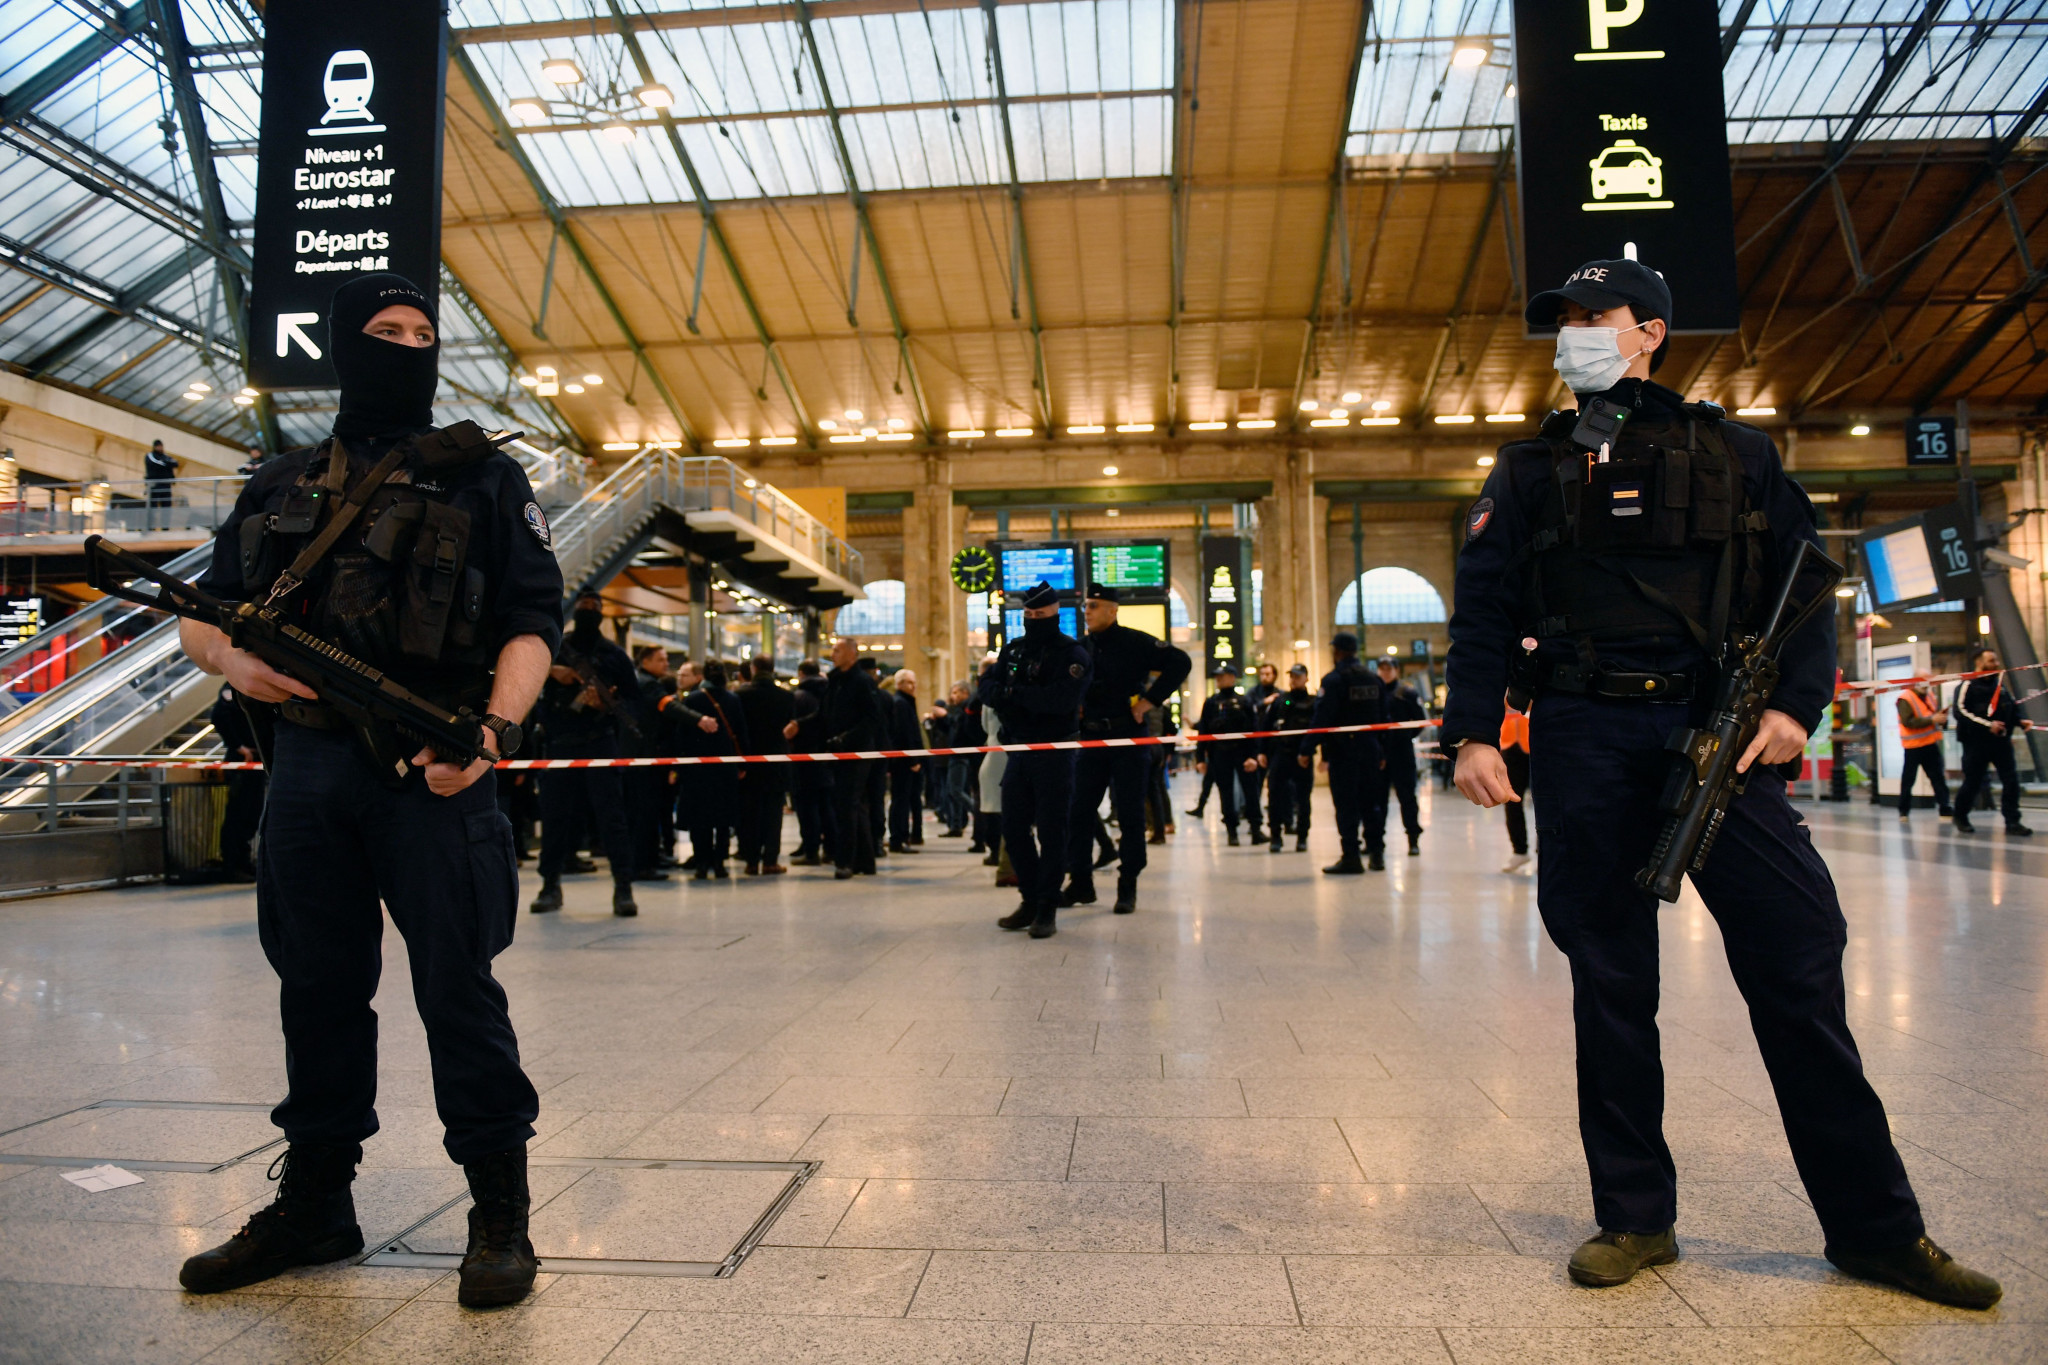 Paris 2024 security plans need to be finalised, warns audit report, as attacker injures six at main train station